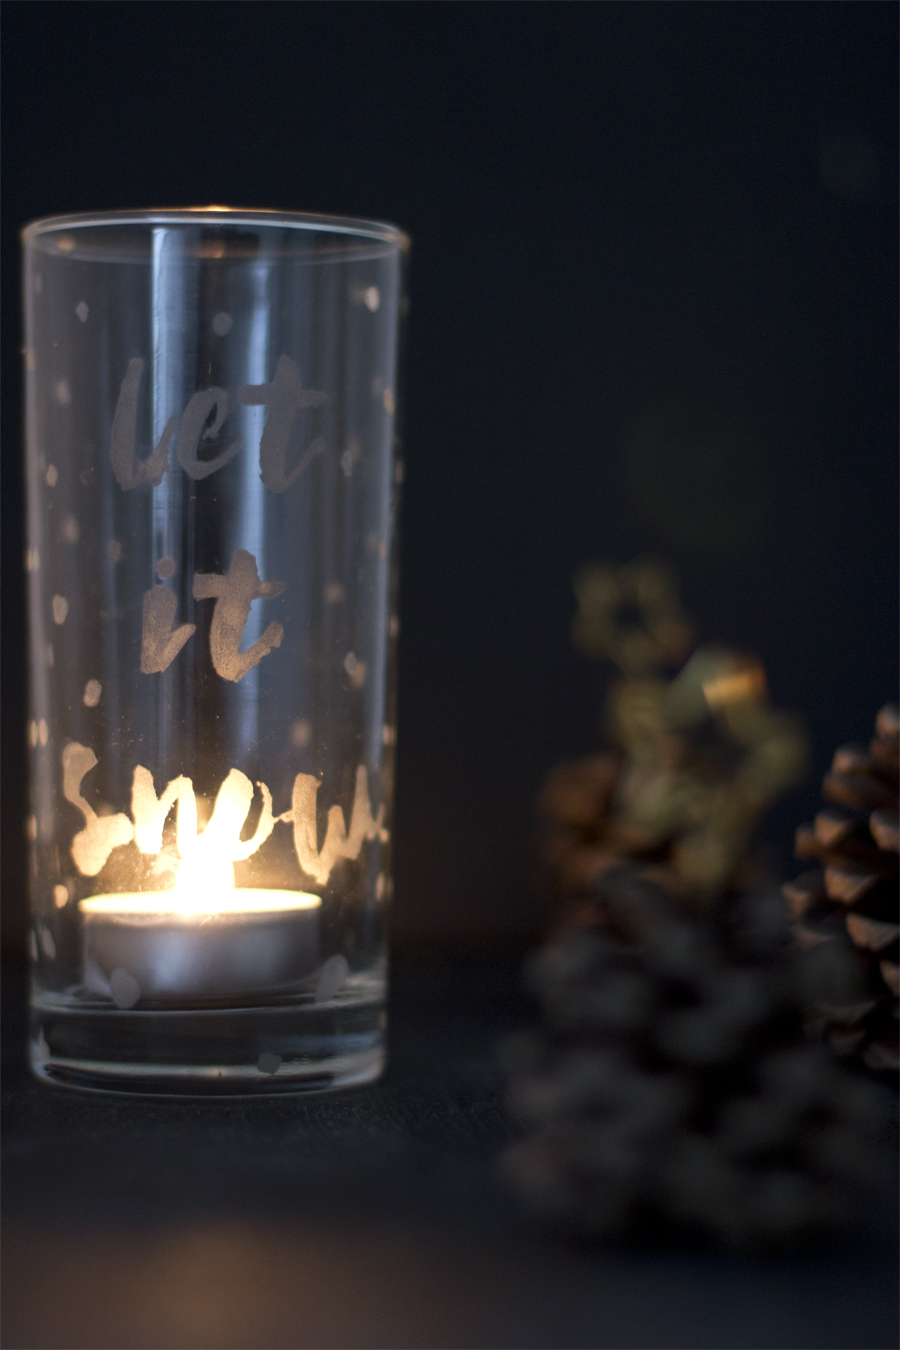 Glass etched winter lantern DIY | LOOK WHAT I MADE ...